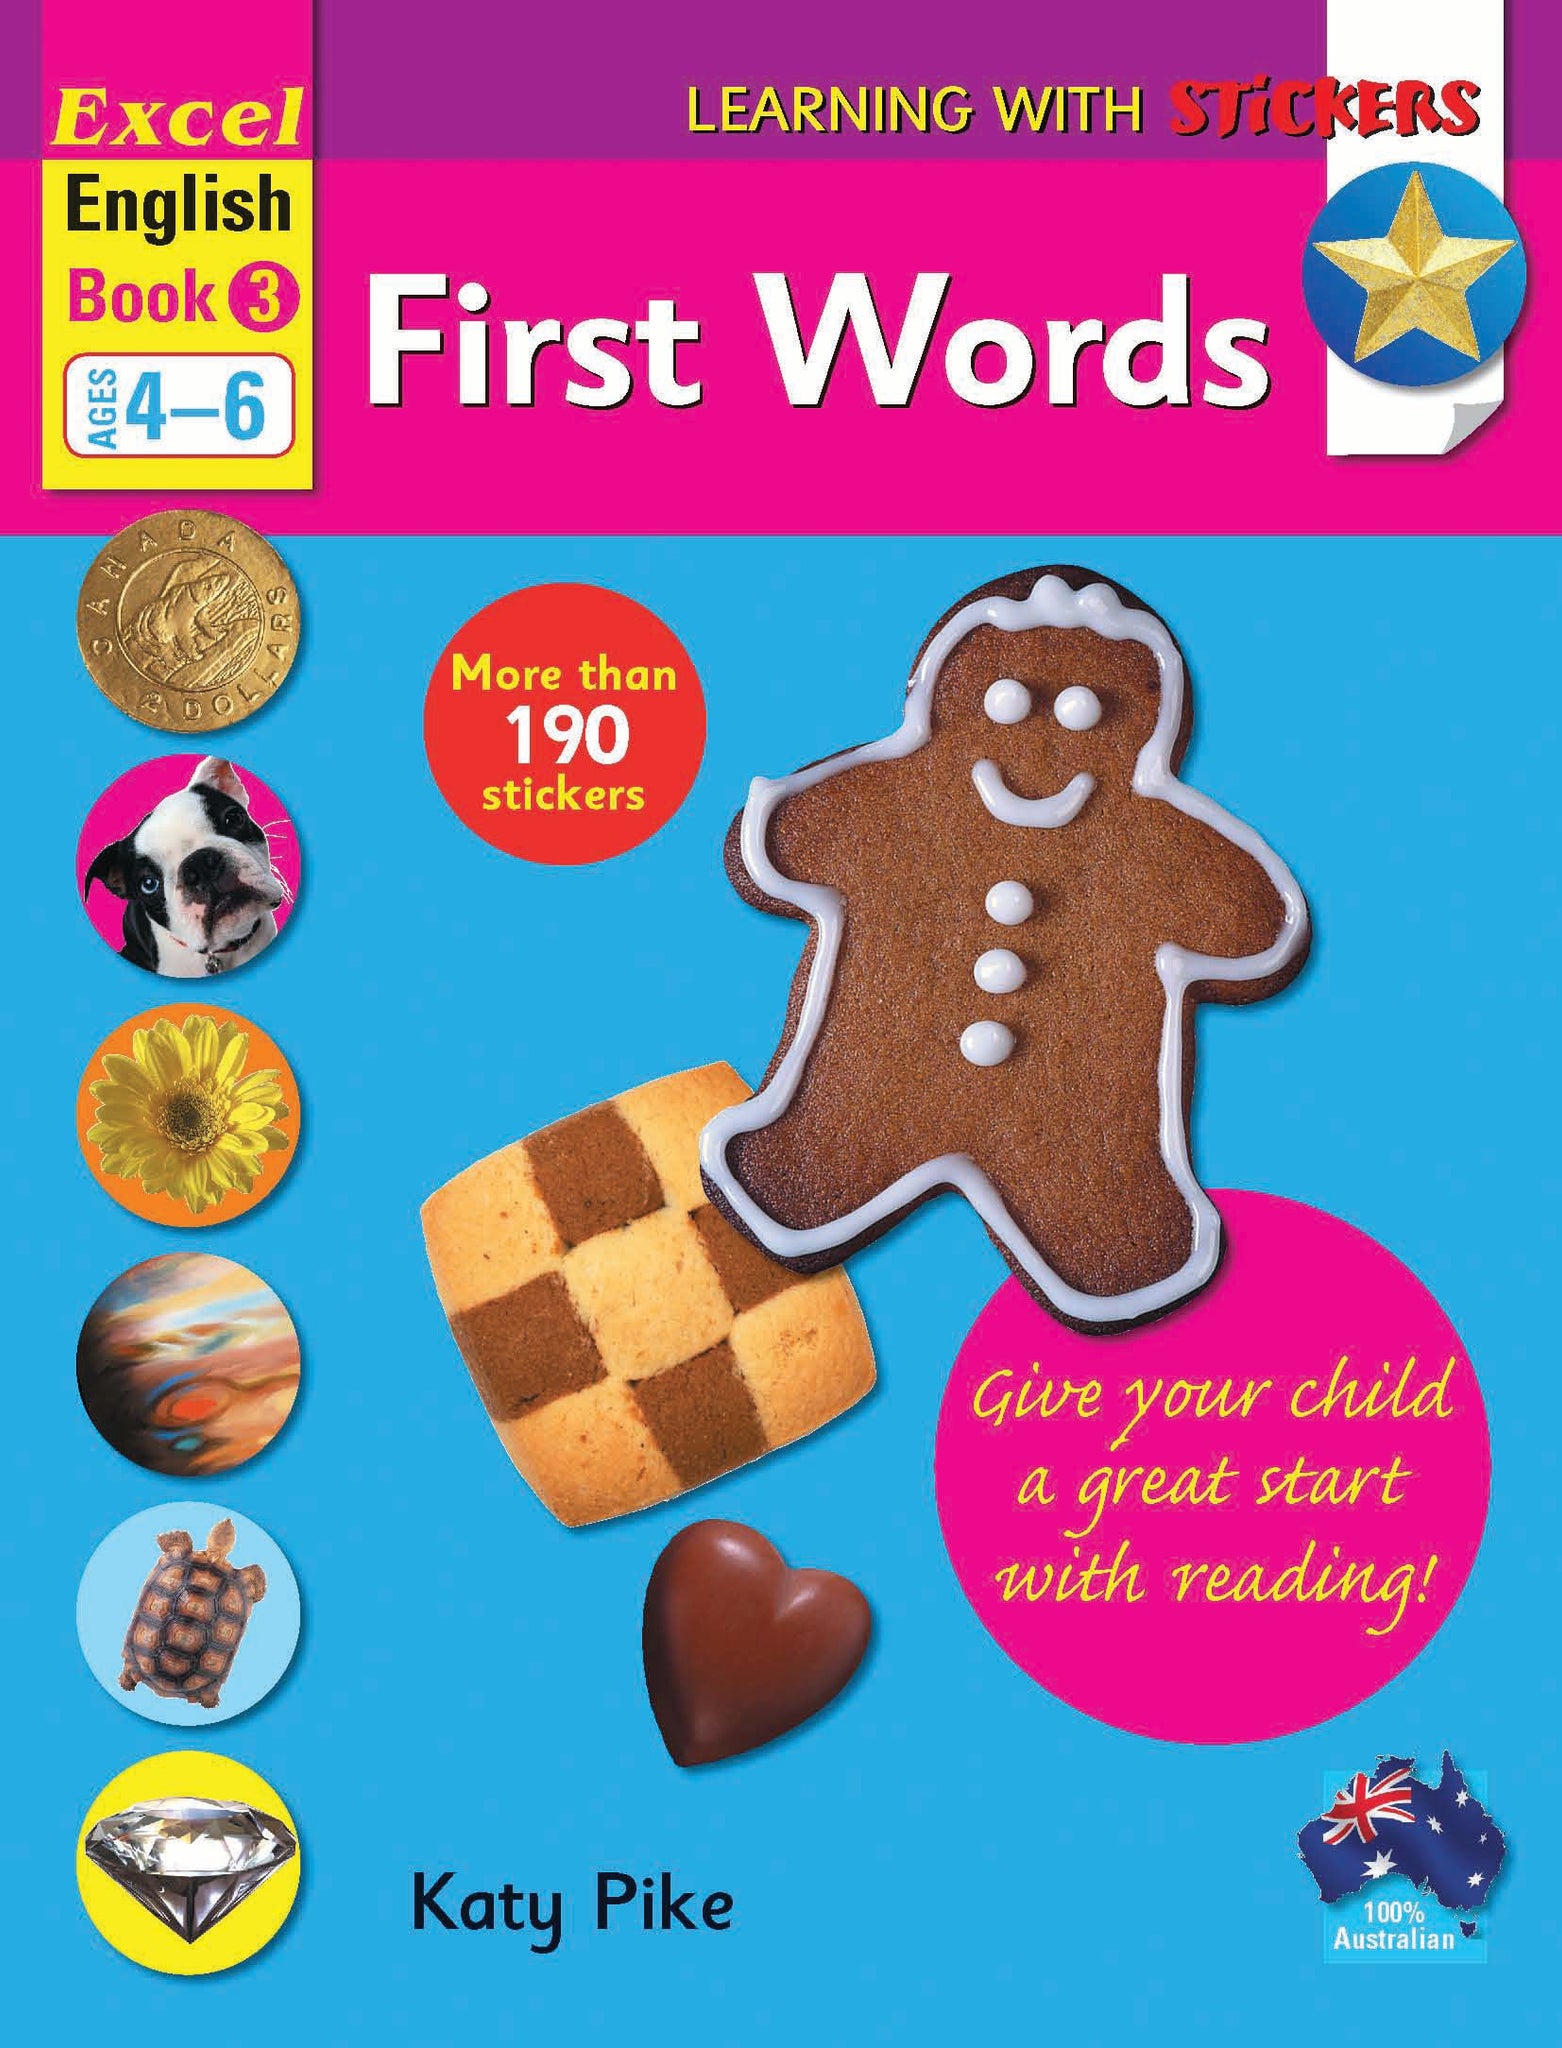 Excel Learning with Stickers English Book 3 School Skills-First Words, Short Vowels and Blending Ages 4-6